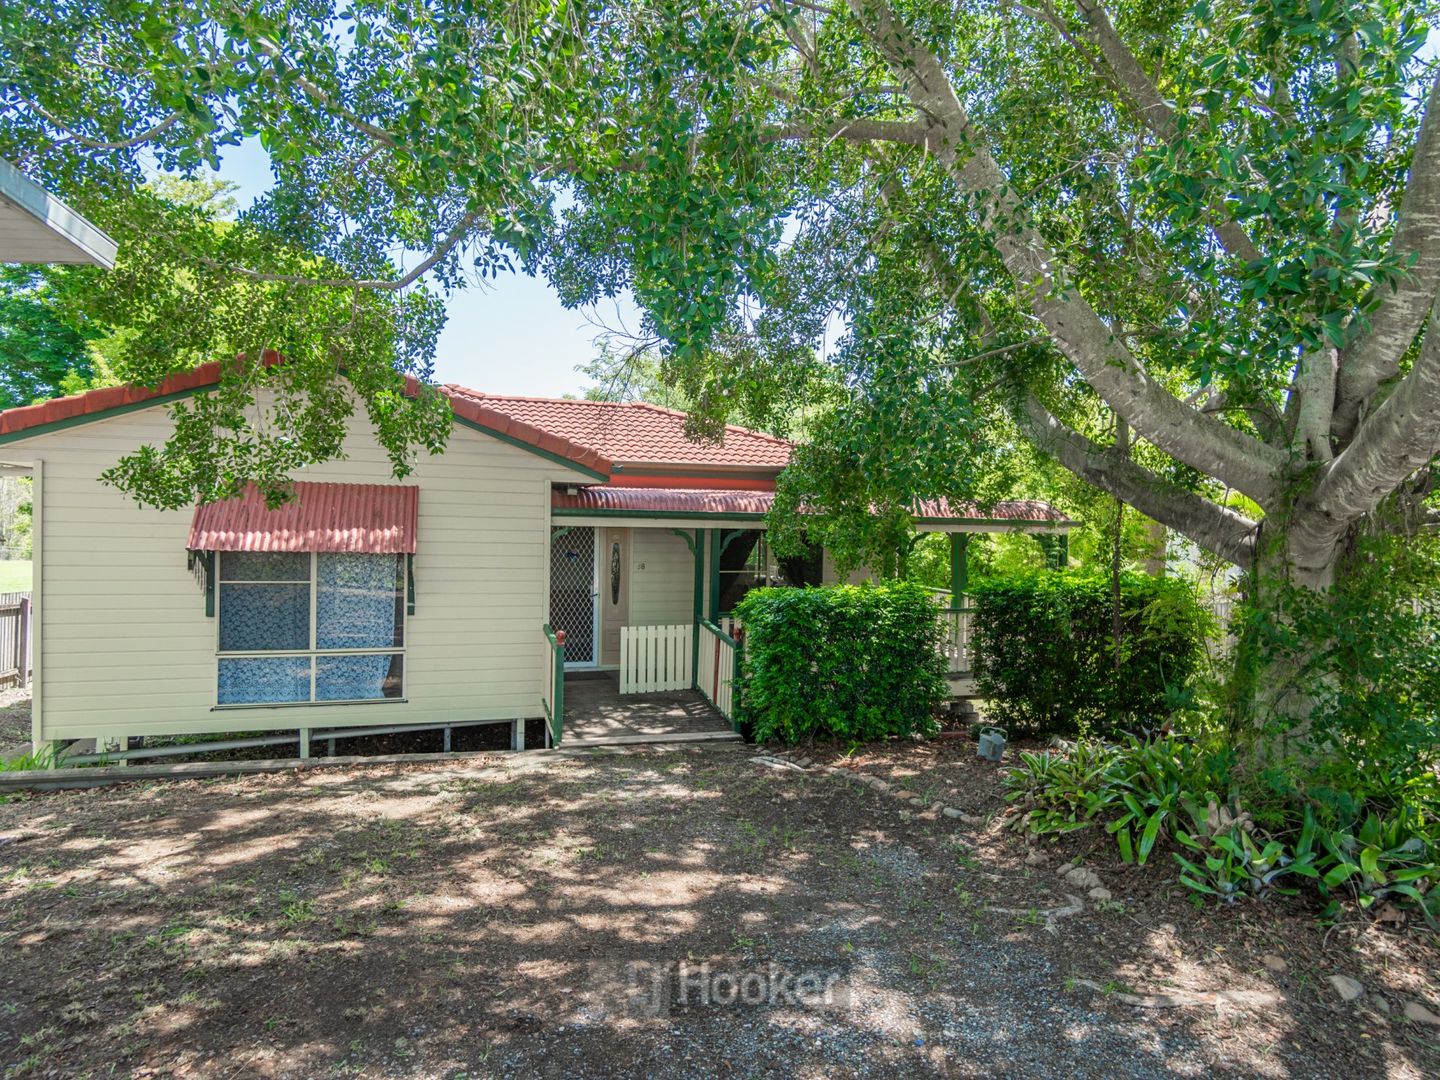 58 Katrina Crescent Waterford West Qld 4133 Domain